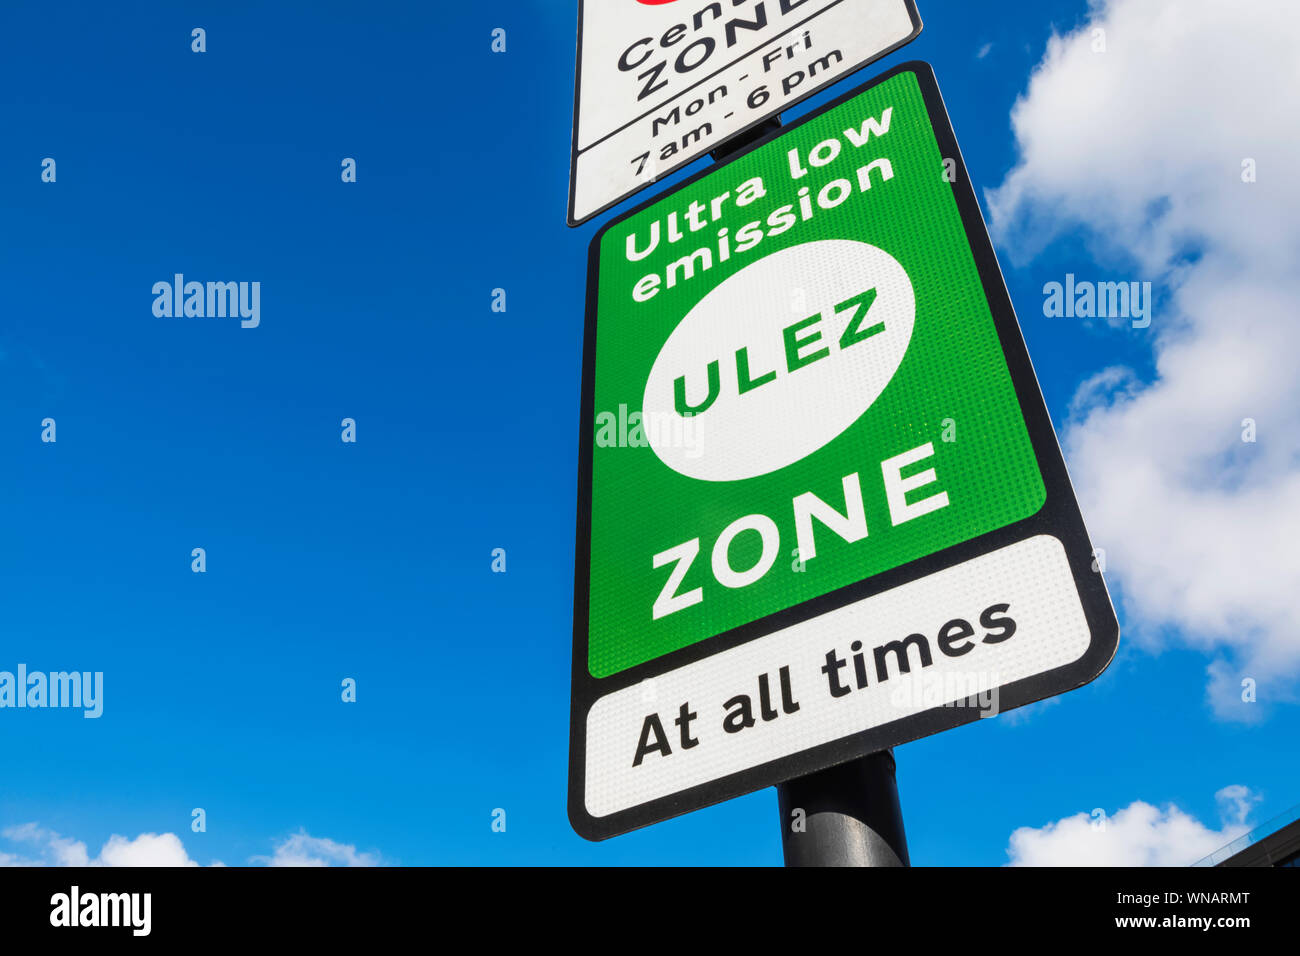 England, London, Transport for London Congestion Charging Zone and Ultra Low Emission Zone Signs Stock Photo